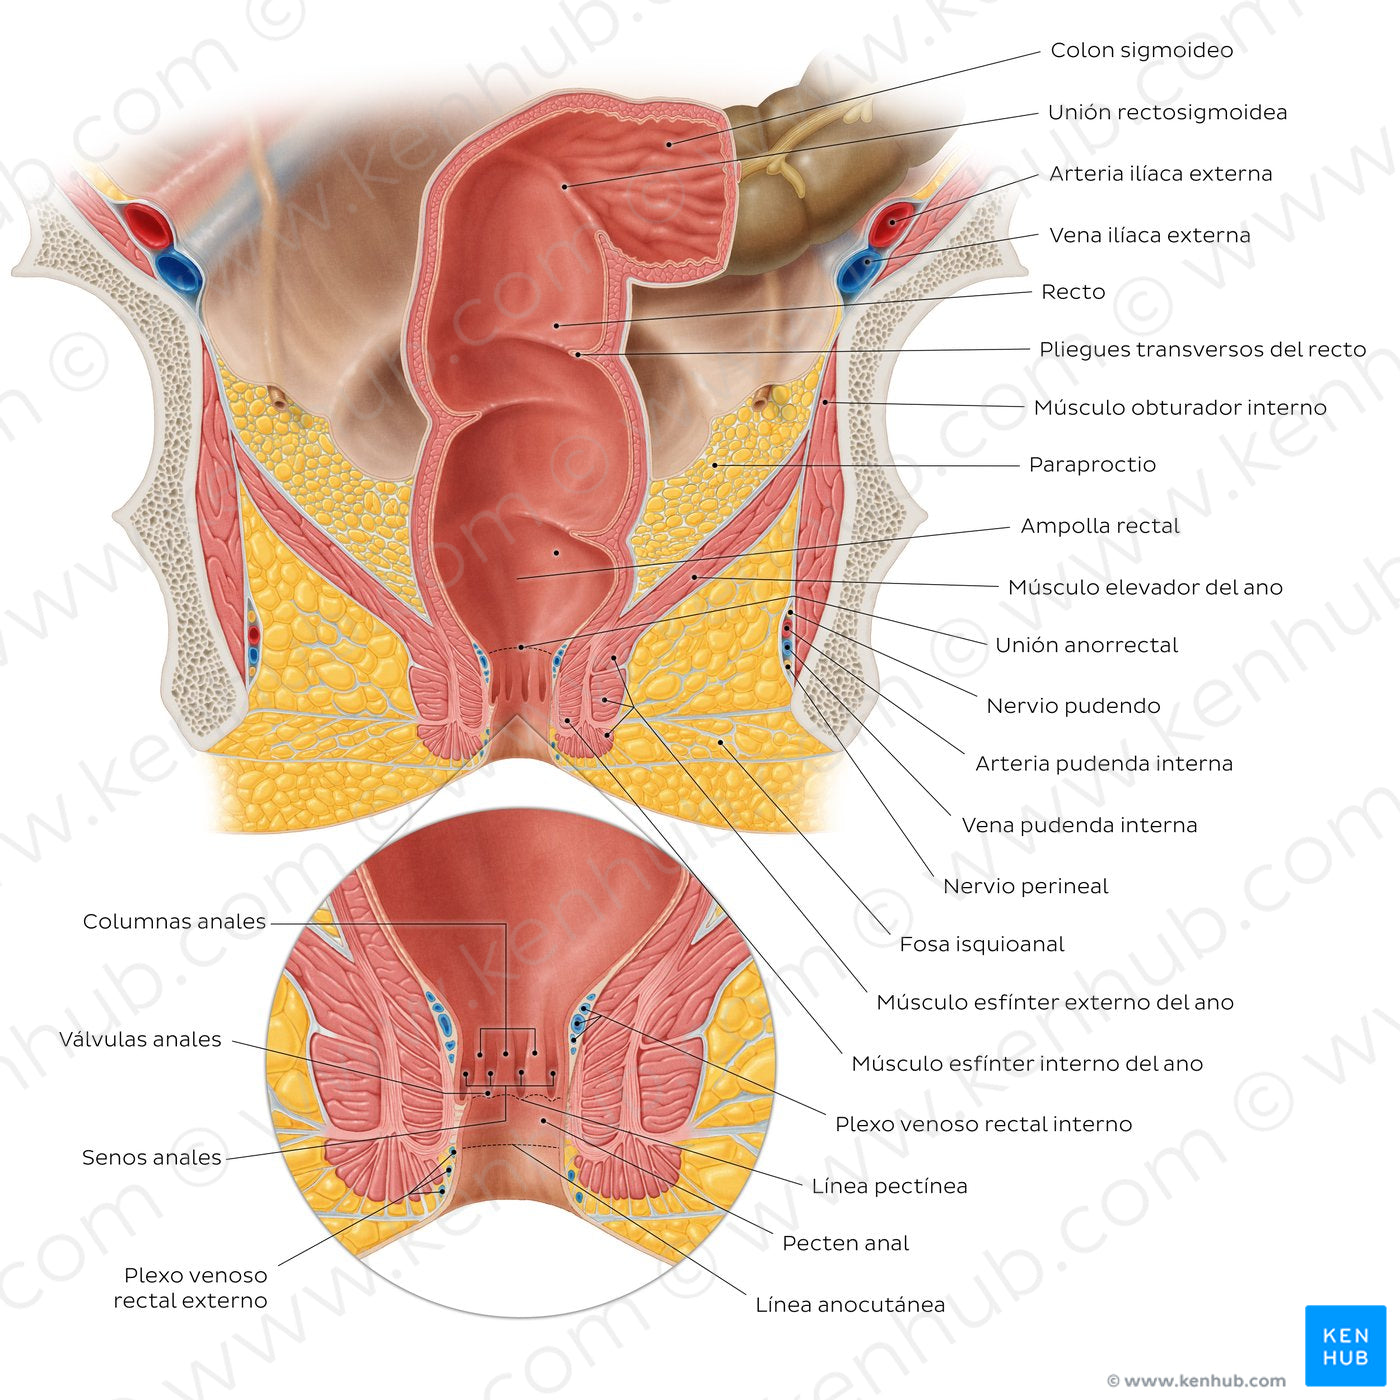 Rectum and anal canal (Spanish)